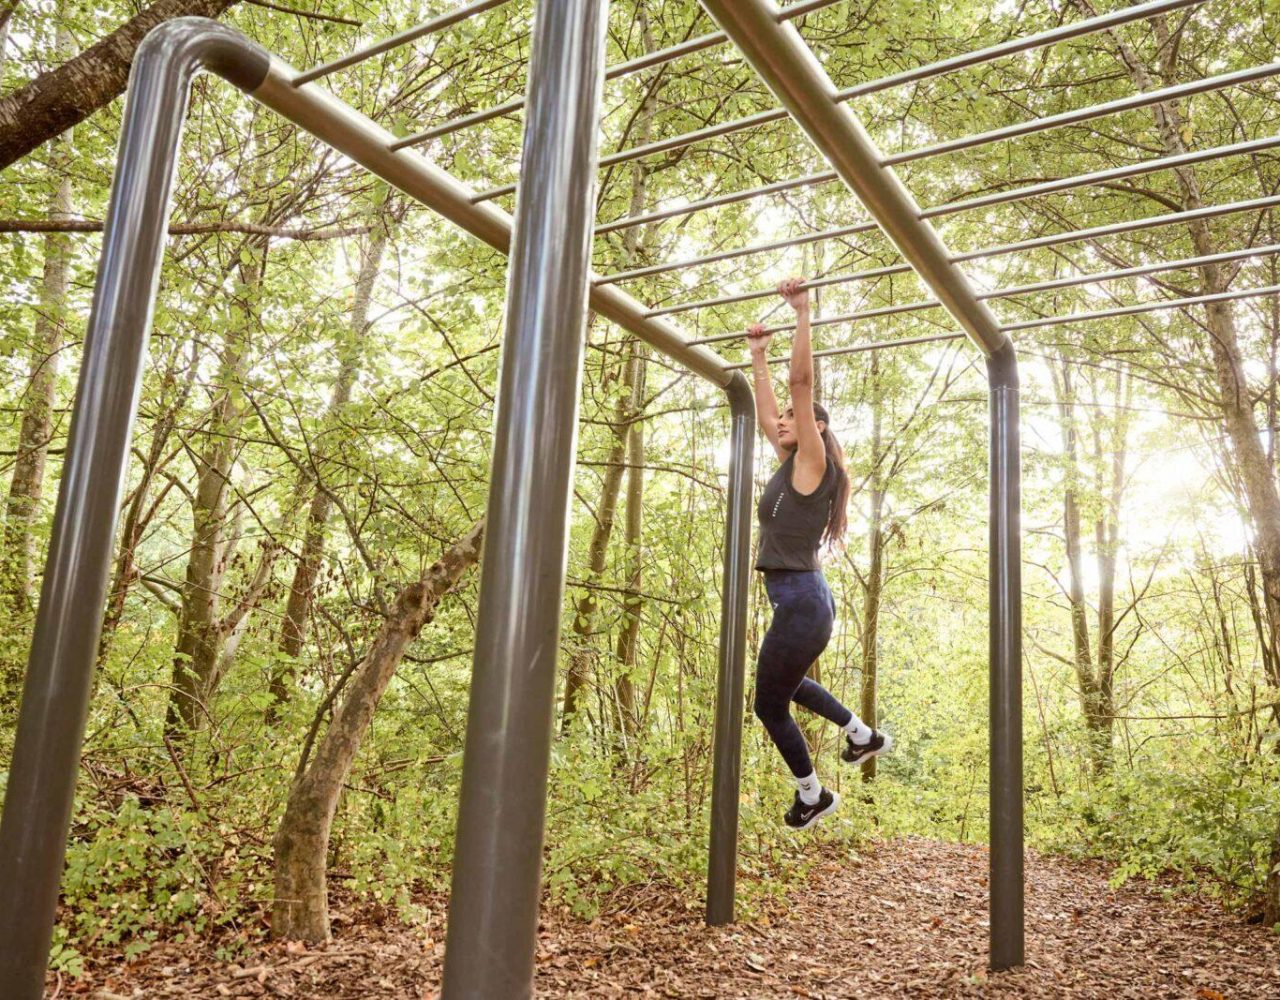 Horizontal Ladder Double - Outdoor obstacles to train for free and without limitations